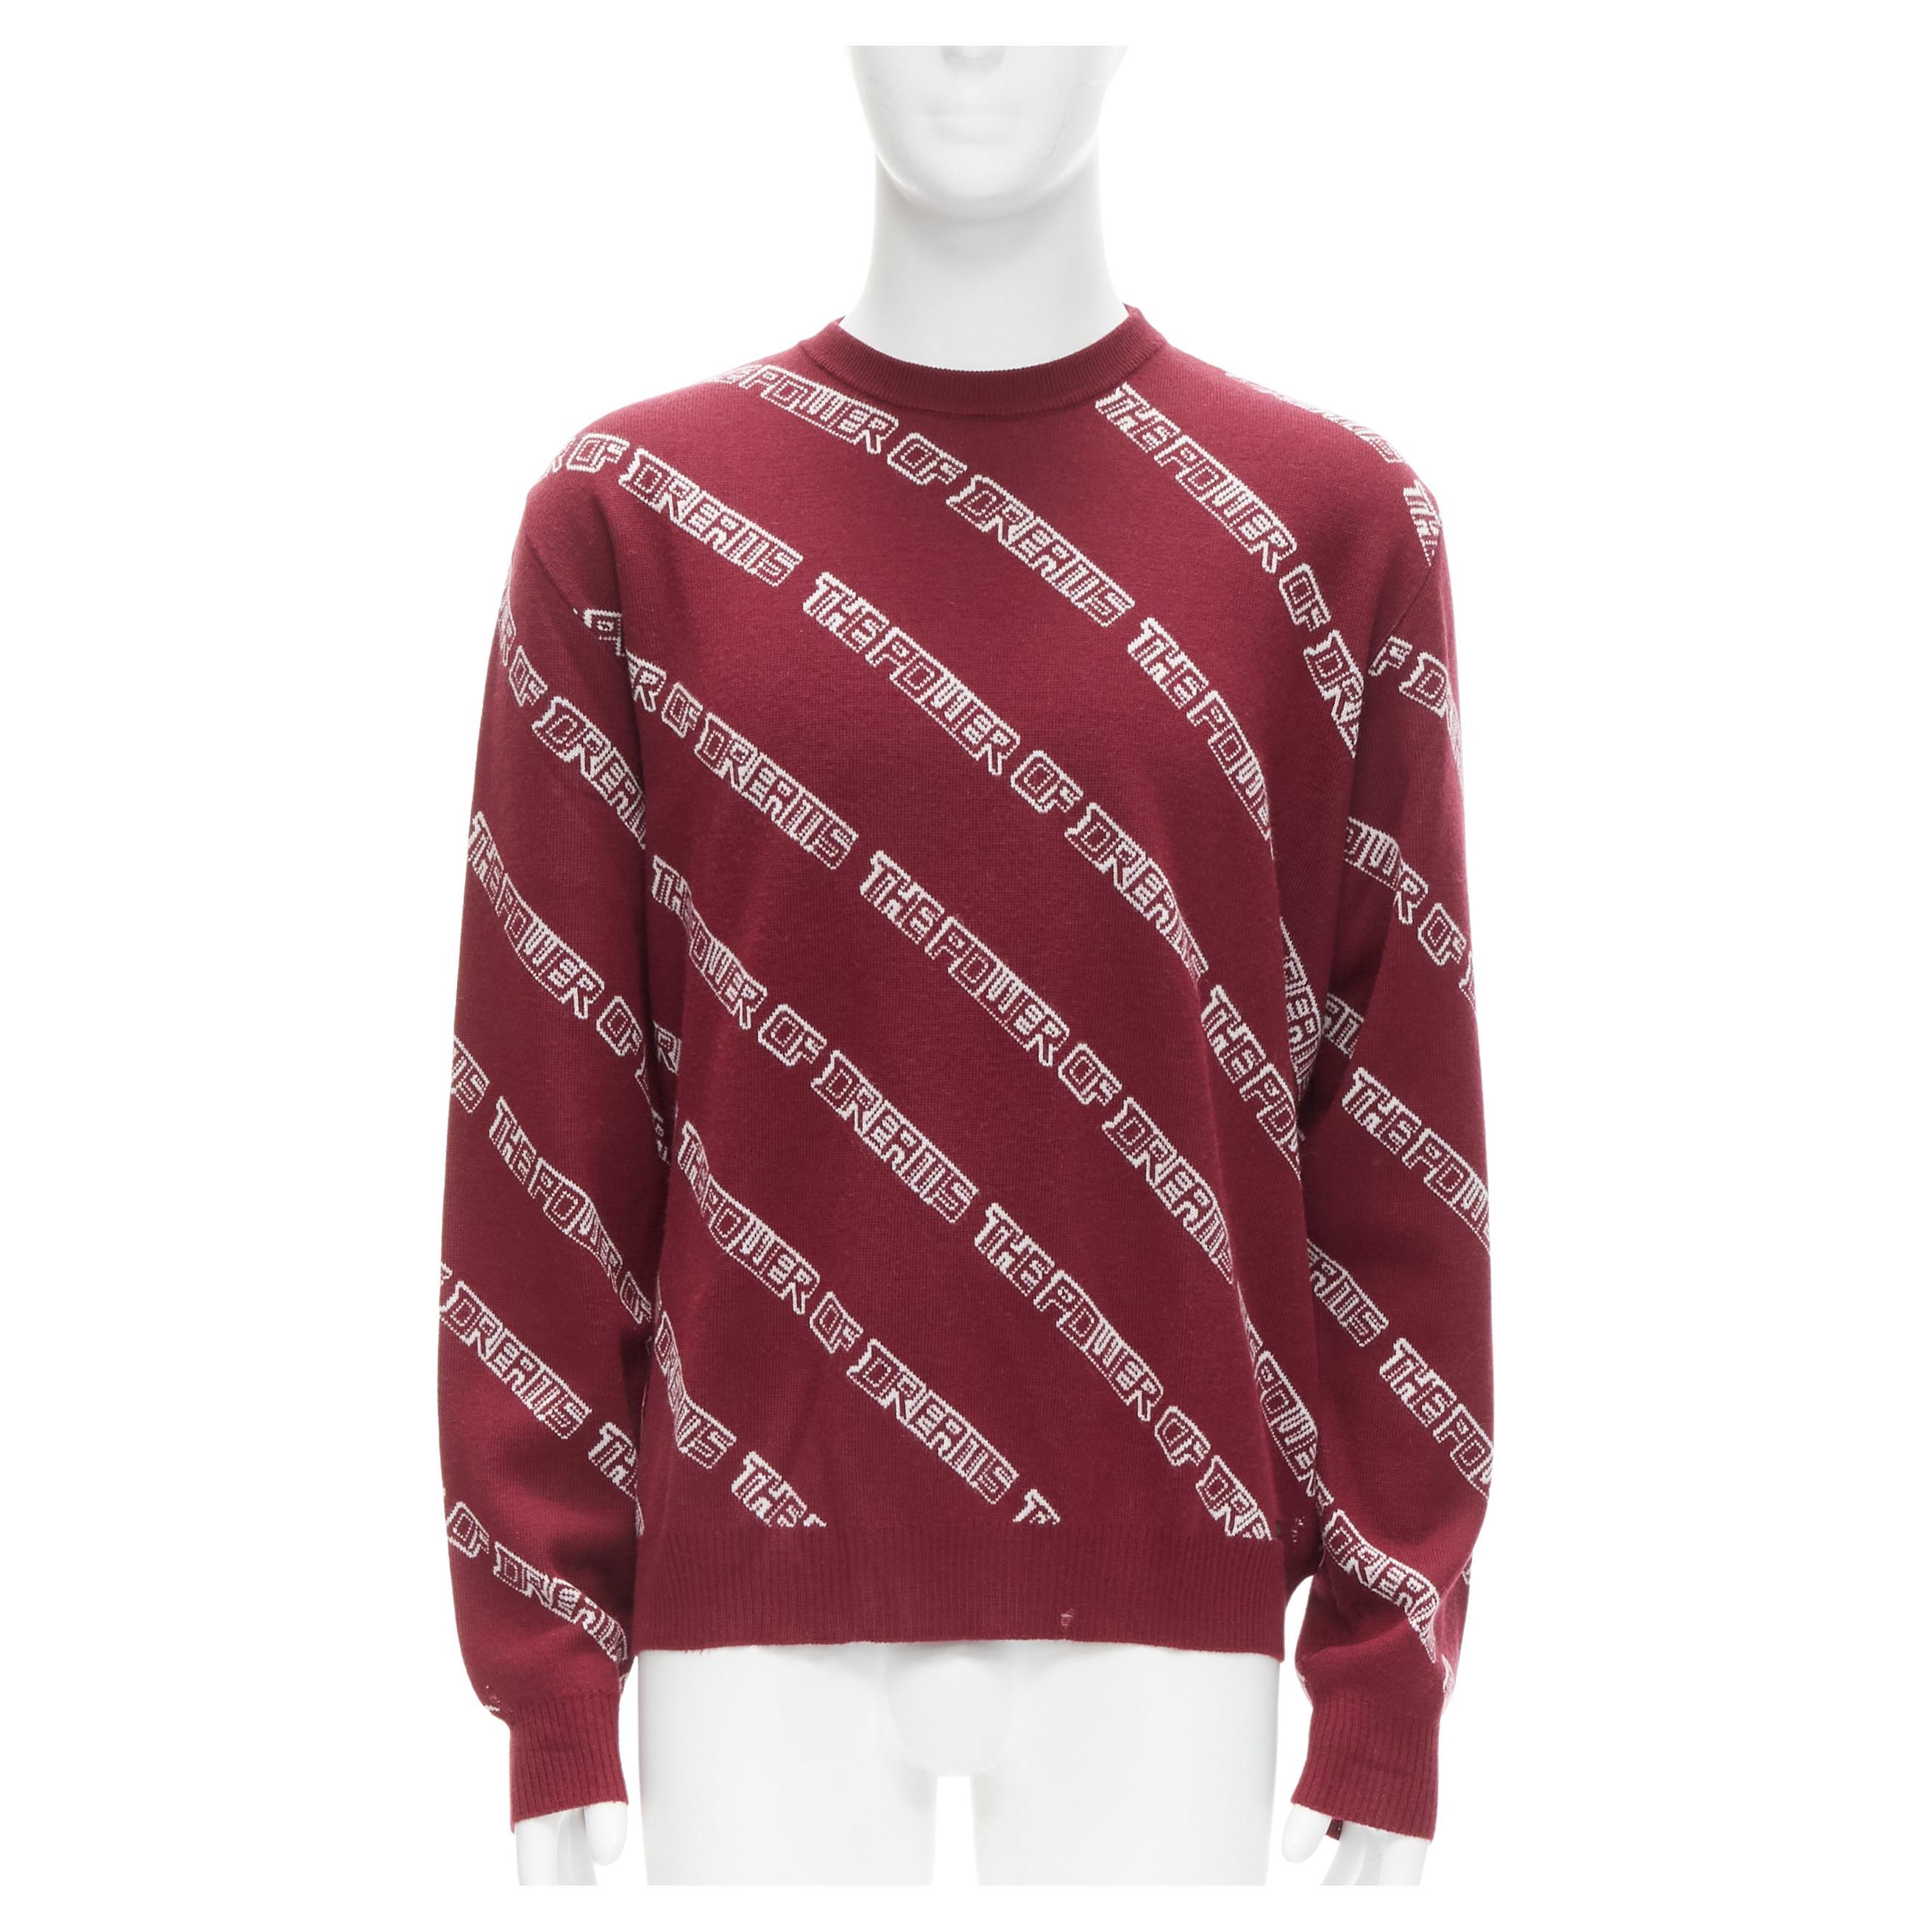 BALENCIAGA 2017 The Power Of Dreams burgundy red white sweater S For Sale